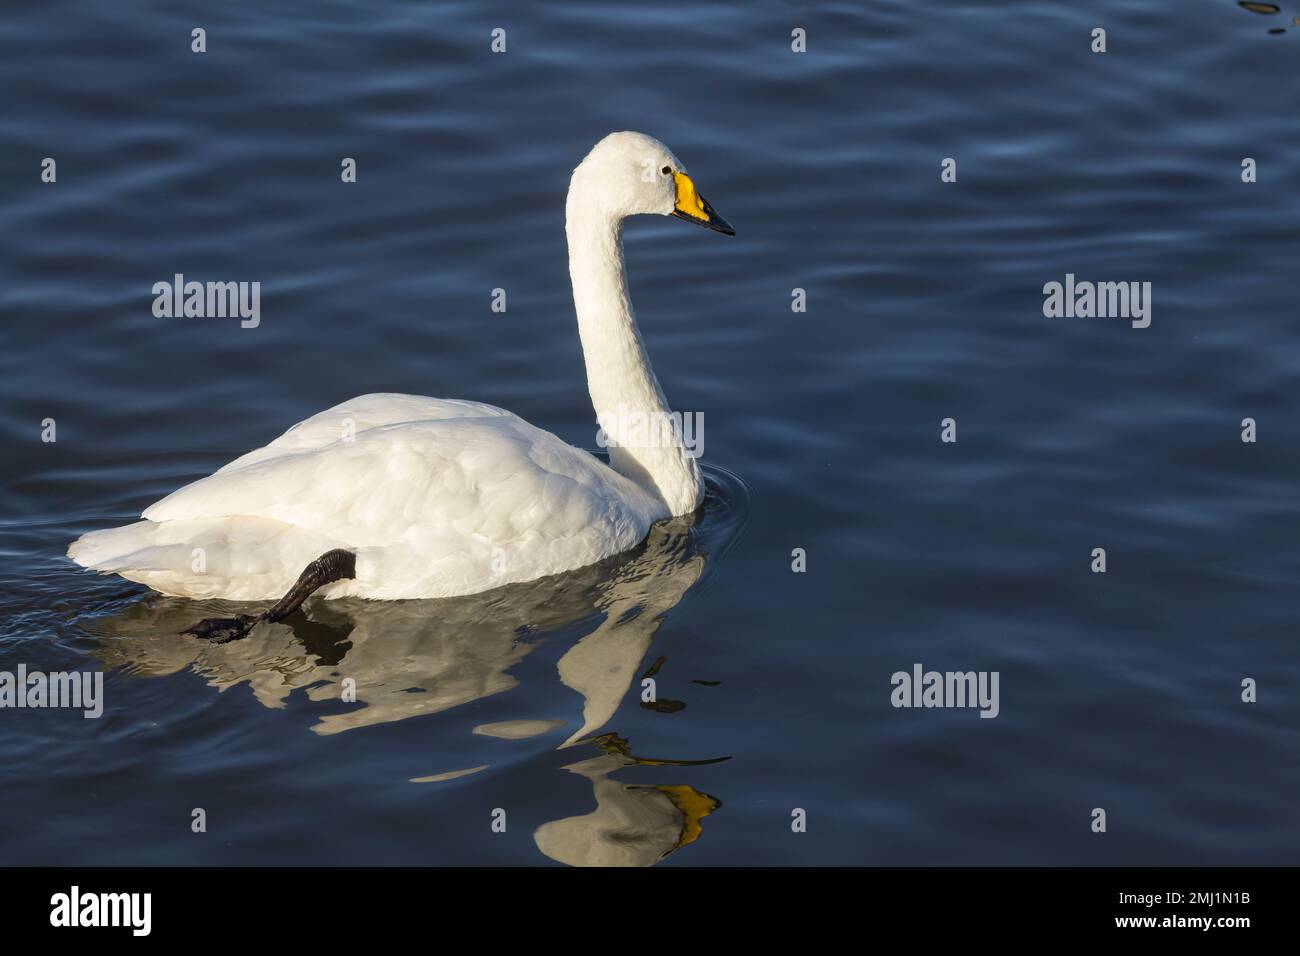 Whooper swan Cygnus cygnus black and yellow bill with yellow part extending beond nostrills long upright neck white plumage black legs and webbed feet Stock Photo